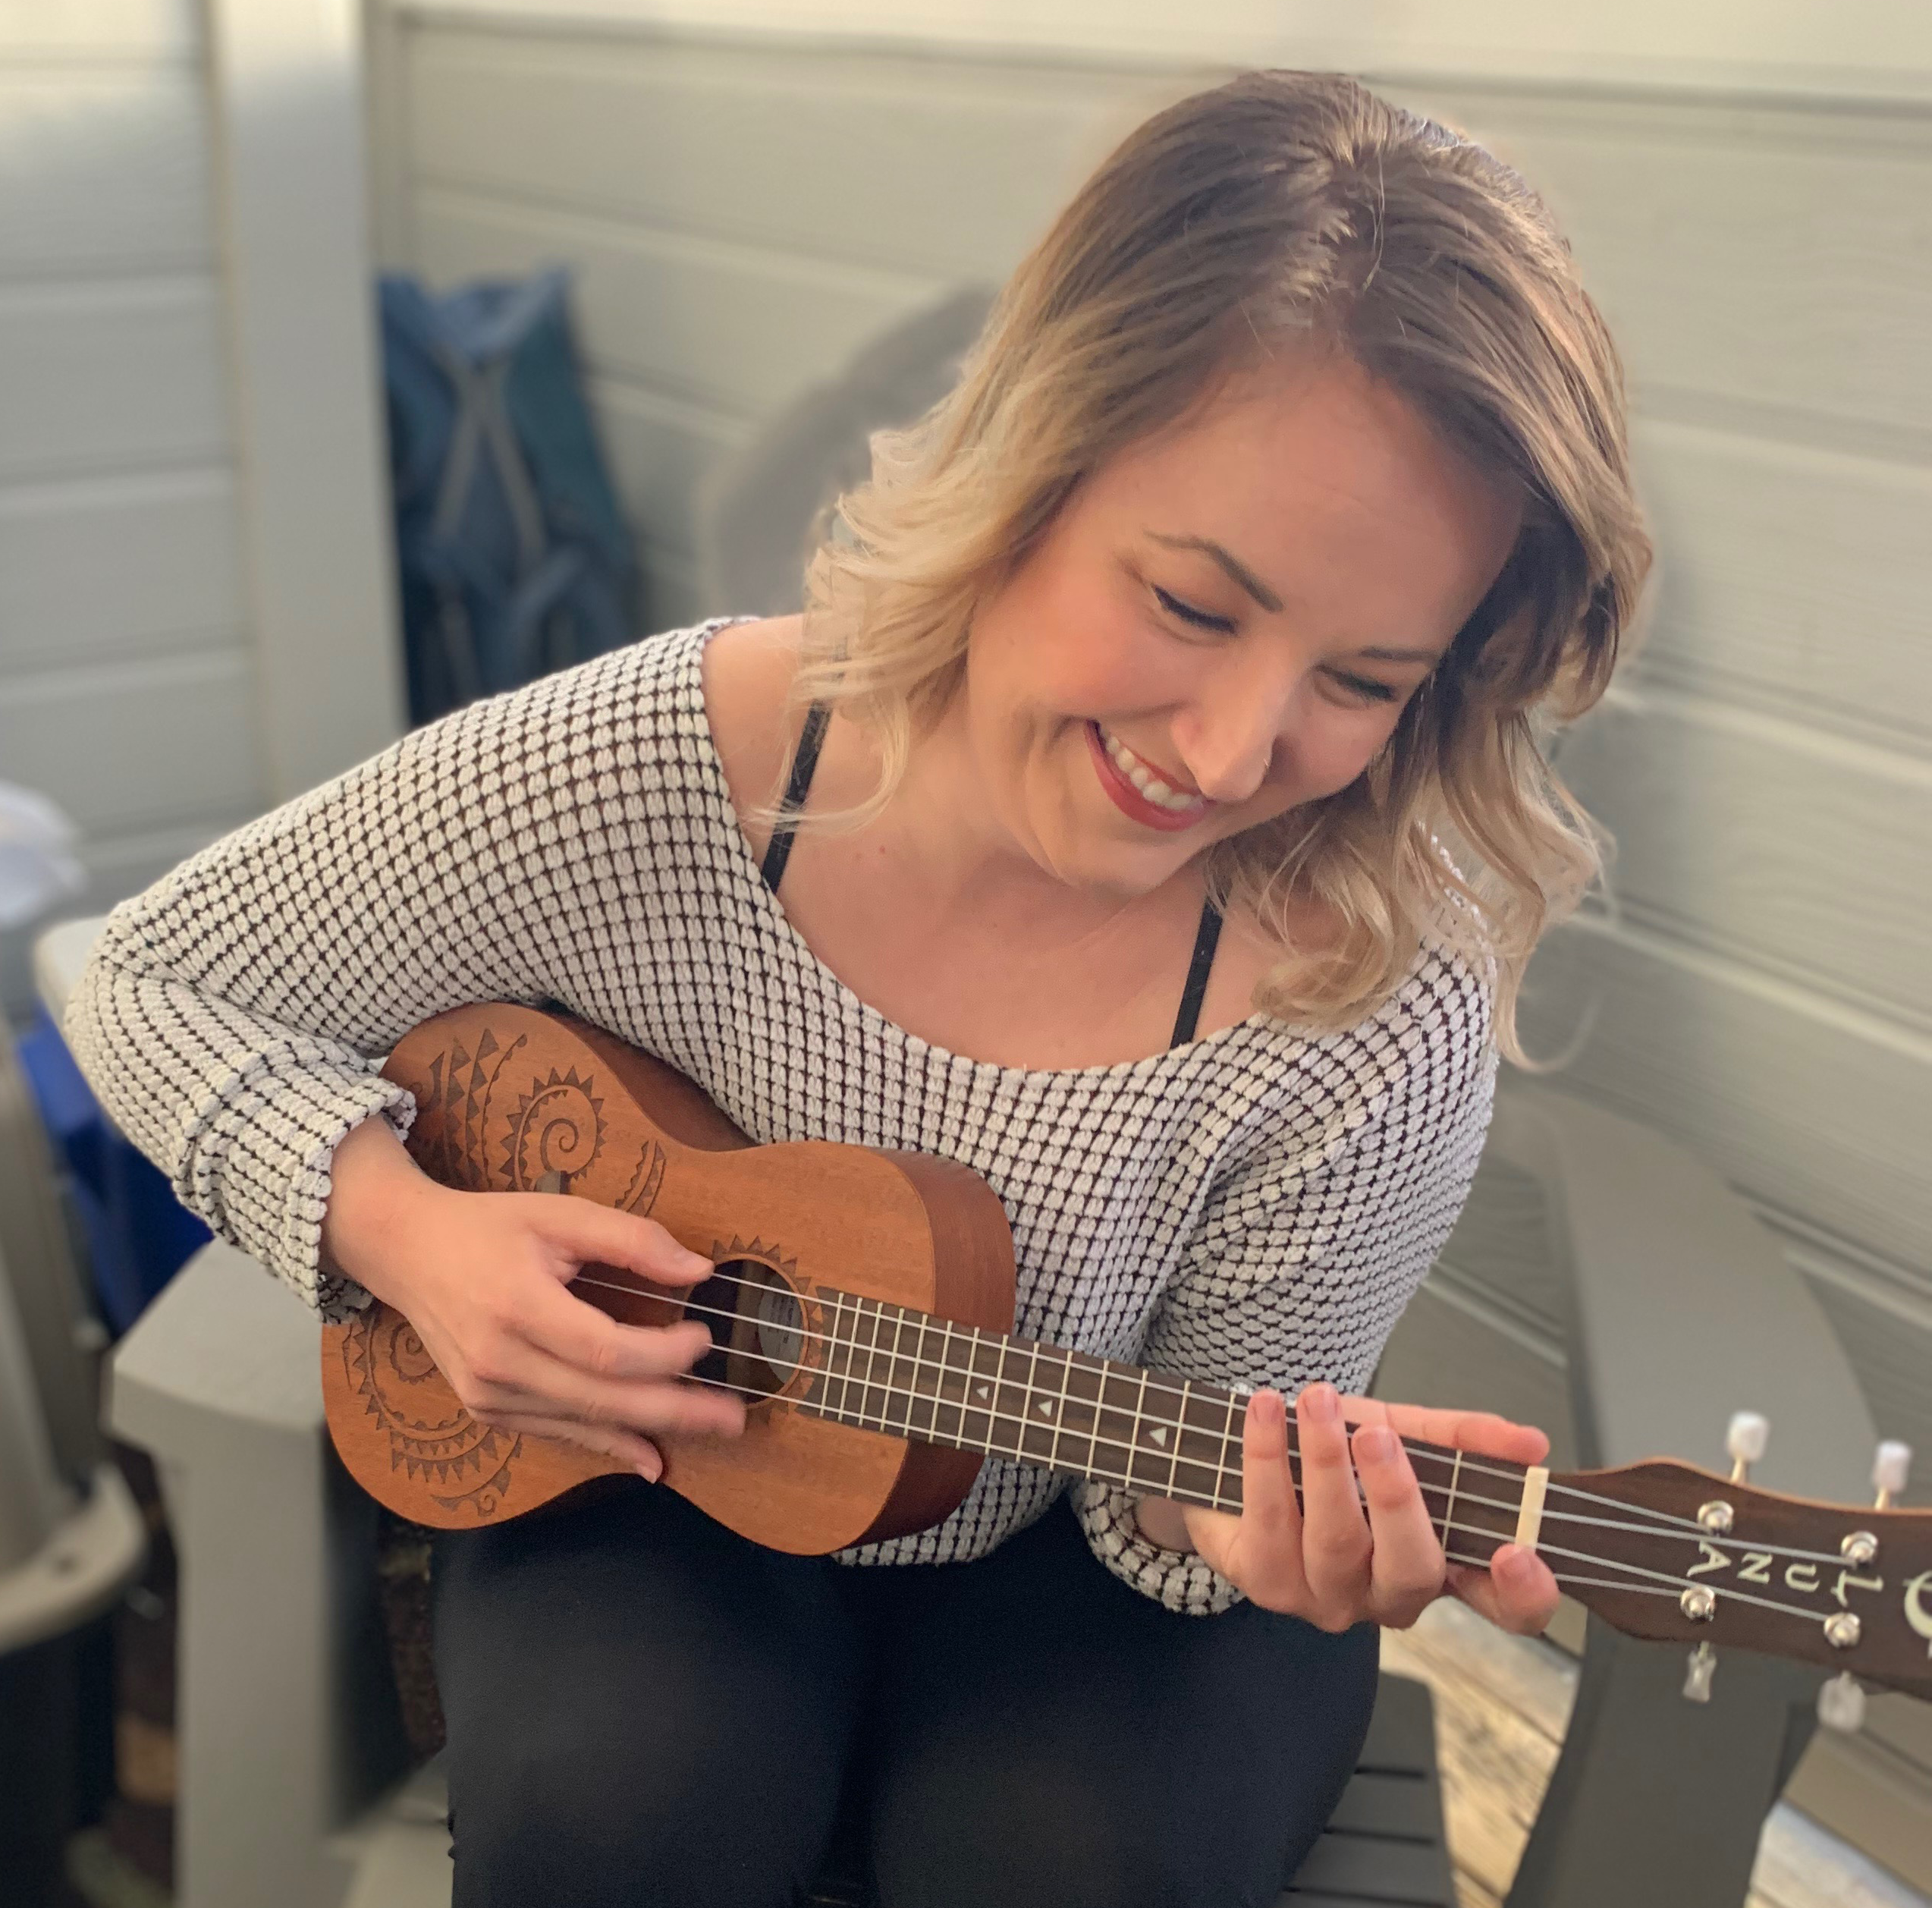 Arryved product support specialists Olyvia Beyette playing the ukulele